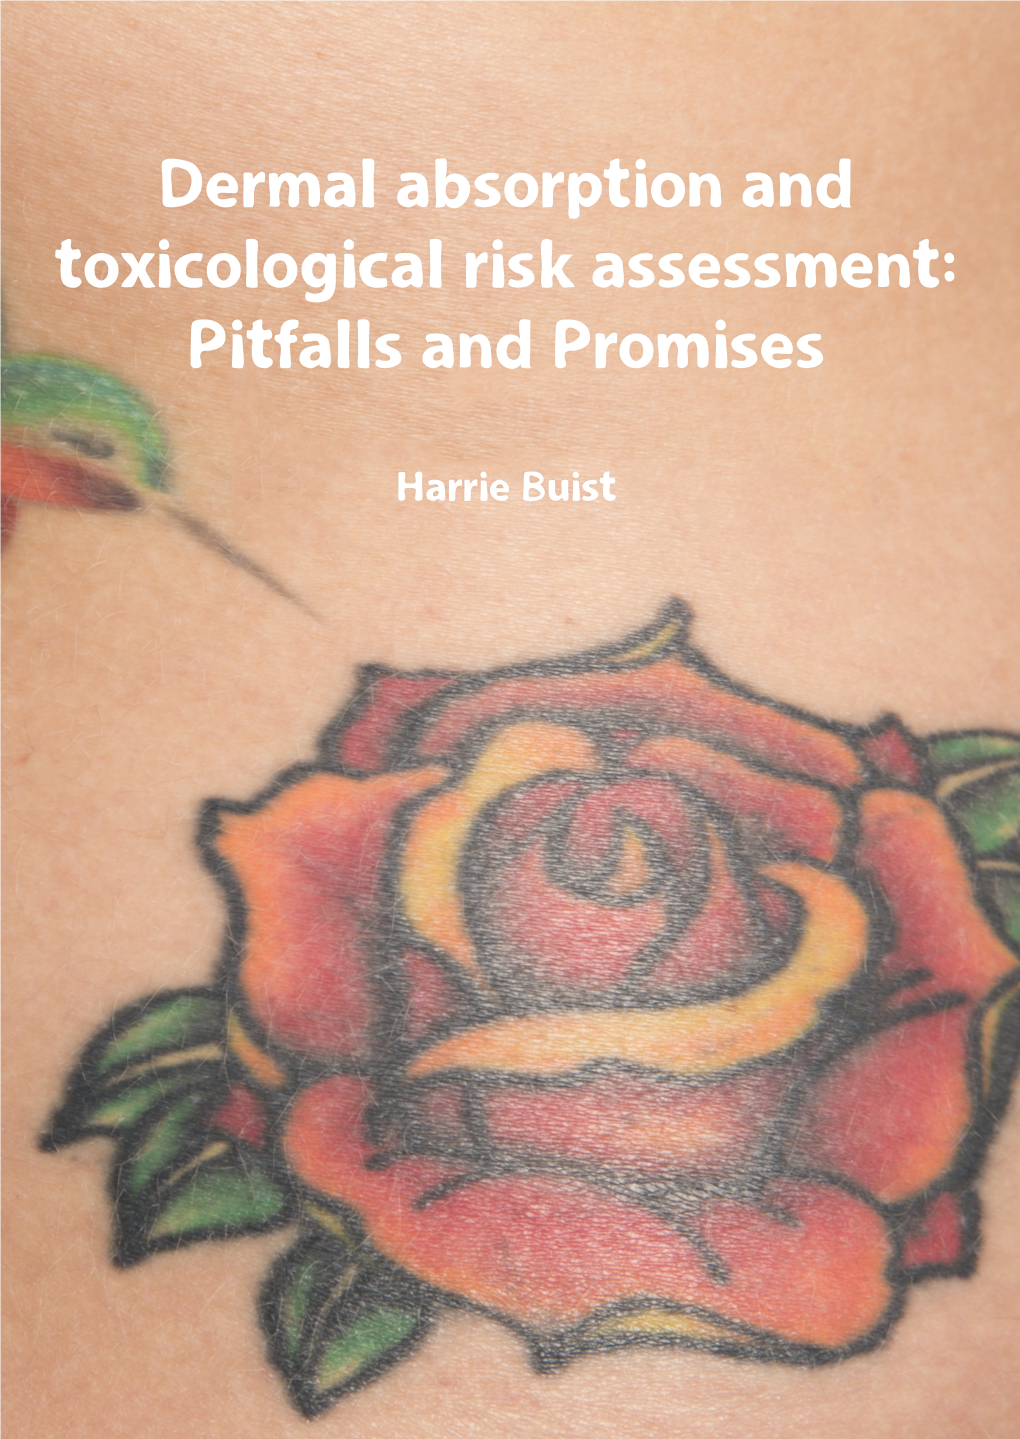 Dermal Absorption and Toxicological Risk Assessment: Pitfalls Promises Dermal Absorption and Toxicological Risk Assessment: Pitfalls and Promises